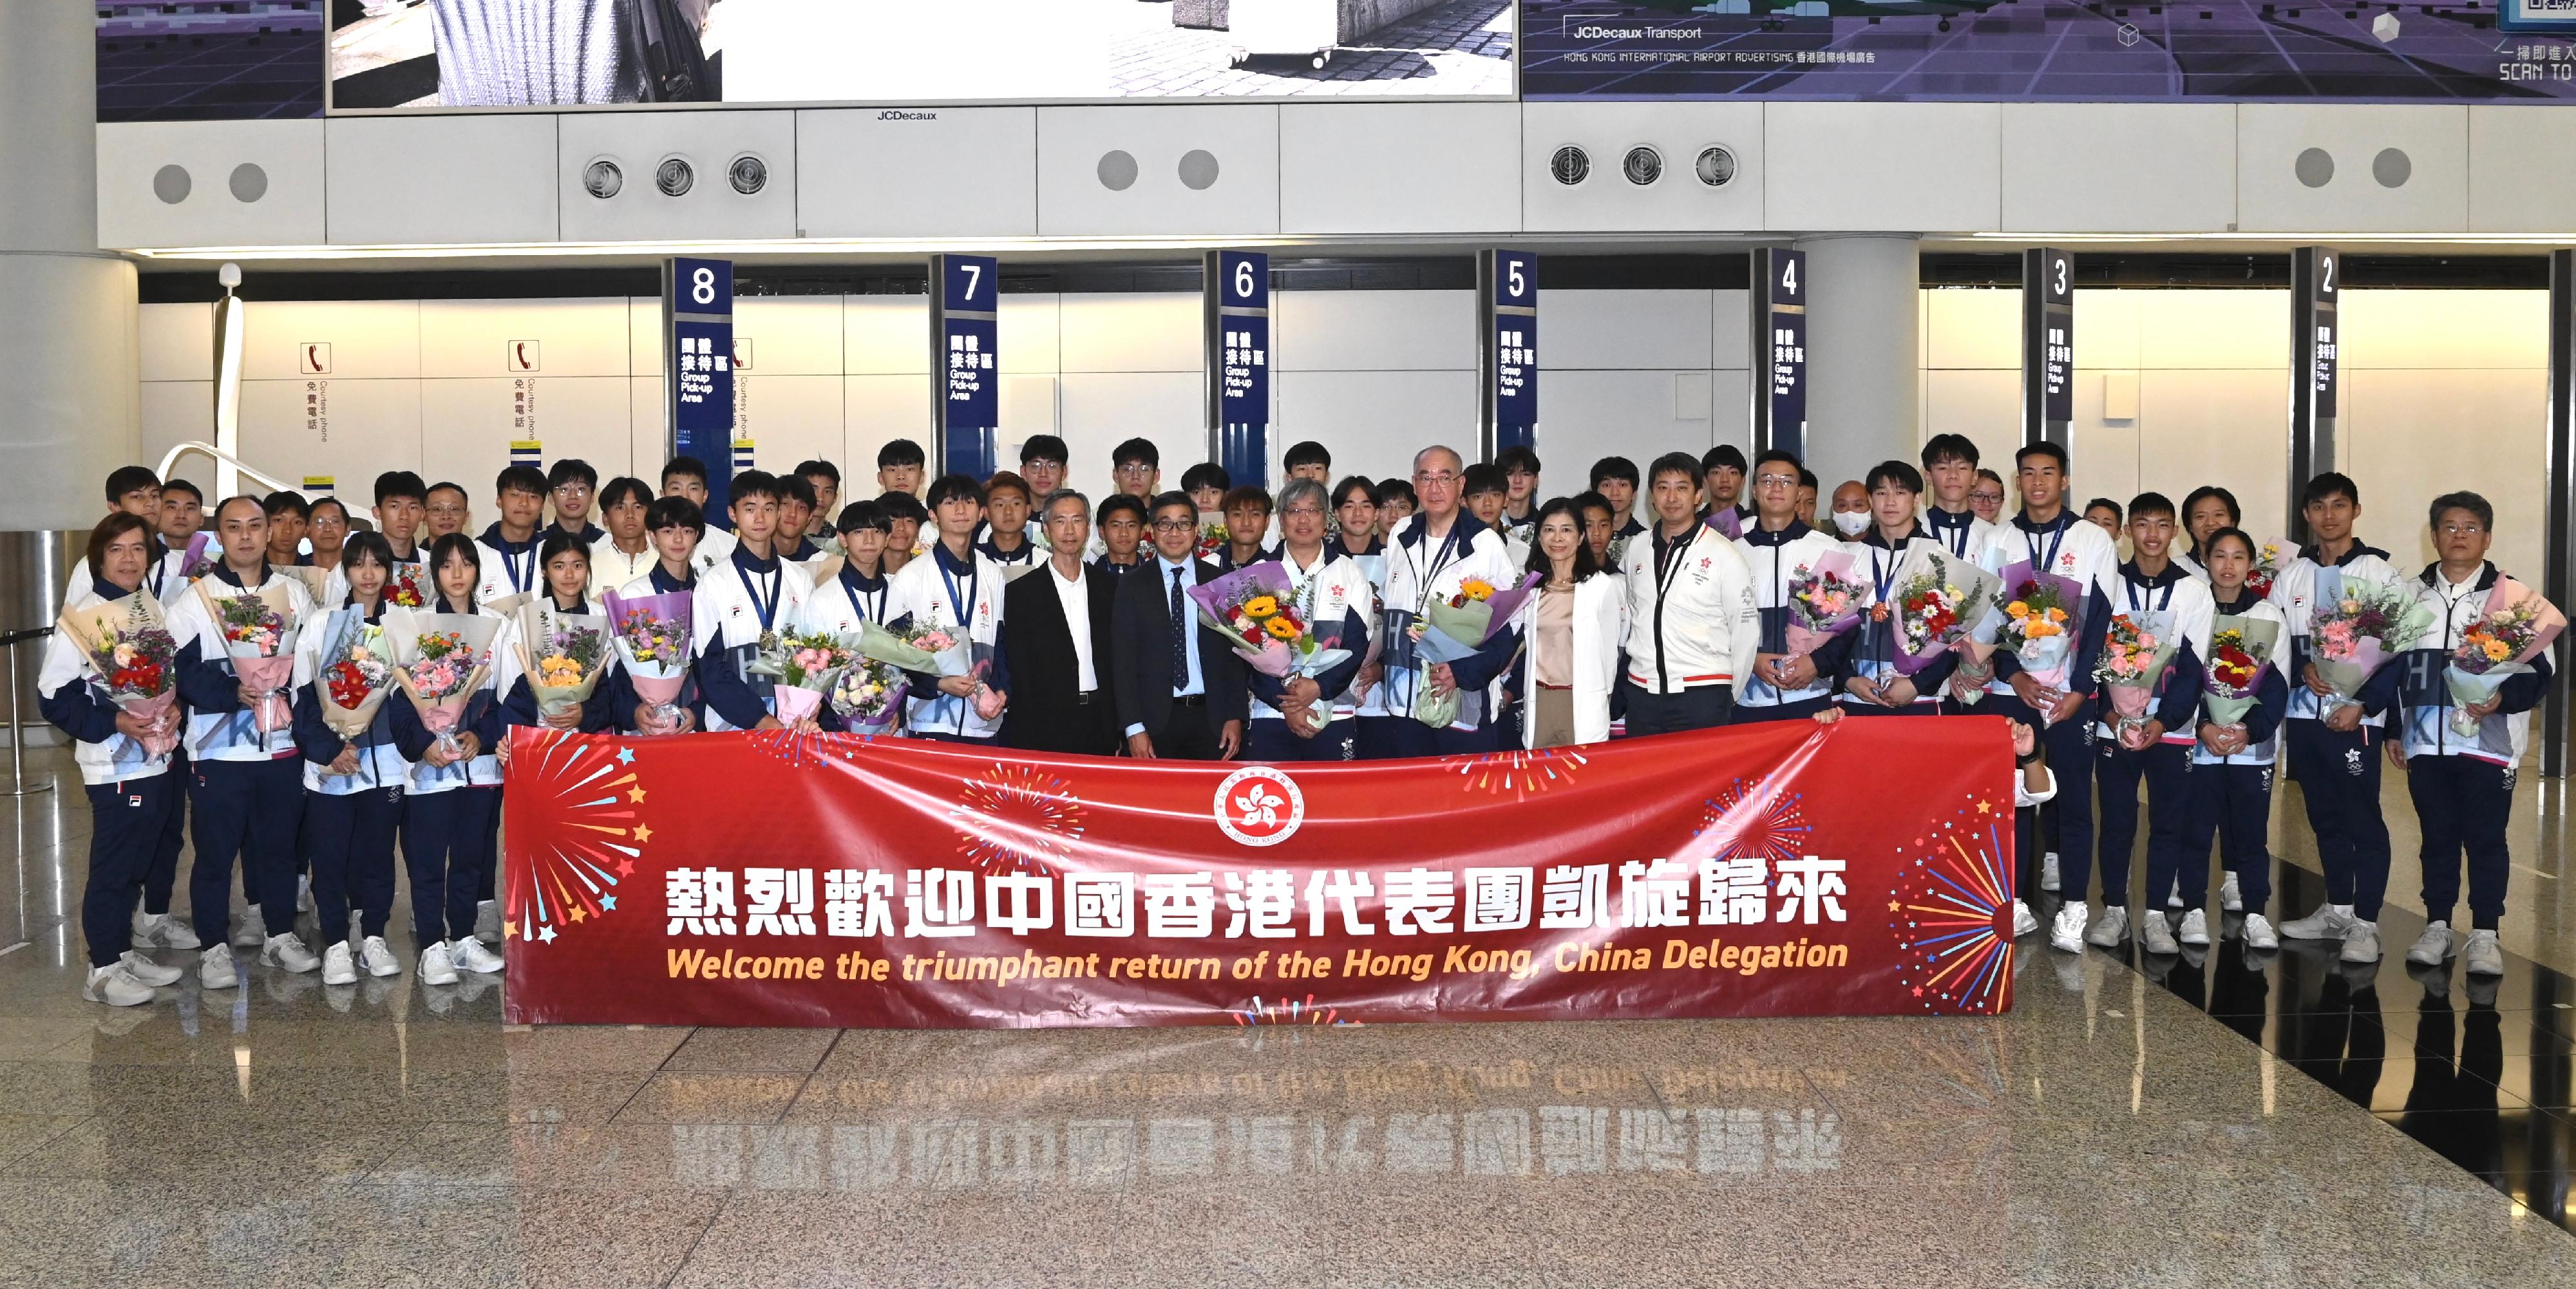 The Hong Kong Special Administrative Region Government held a welcome home ceremony at Hong Kong International Airport today (August 23) to greet the Hong Kong, China Delegation on their triumphant return from the Ulaanbaatar 2023 East Asia Youth Games (EAYG). Photo shows the Principal Assistant Secretary (Sports & Recreation) of the Culture, Sports and Tourism Bureau, Mr Paul Cheng (front row, 11th left); Assistant Director (Leisure Services) of the Leisure and Cultural Services Department Ms Olivia Cheung (front row, ninth right); the Chef de Mission of the Hong Kong, China Delegation to the 2023 EAYG, Mr Wong Po-kee (front row, 11th right), and the athletes at the welcome home ceremony.